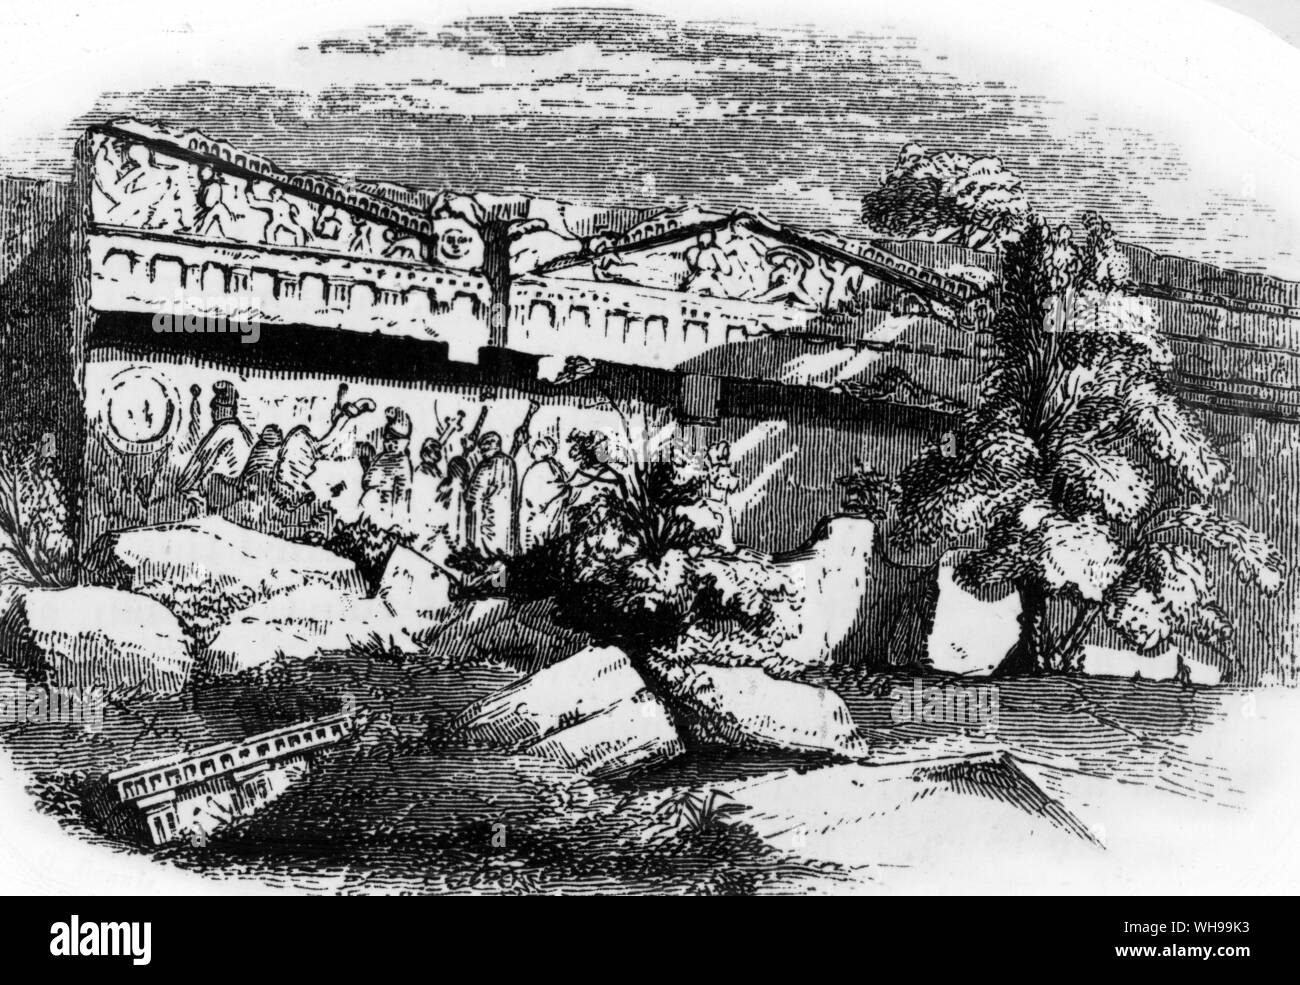 The temple tombs of Nurchia as drawn by George Dennis 1843 About a hundred tombs wre sculpted in the cliff face of the valley Stock Photo